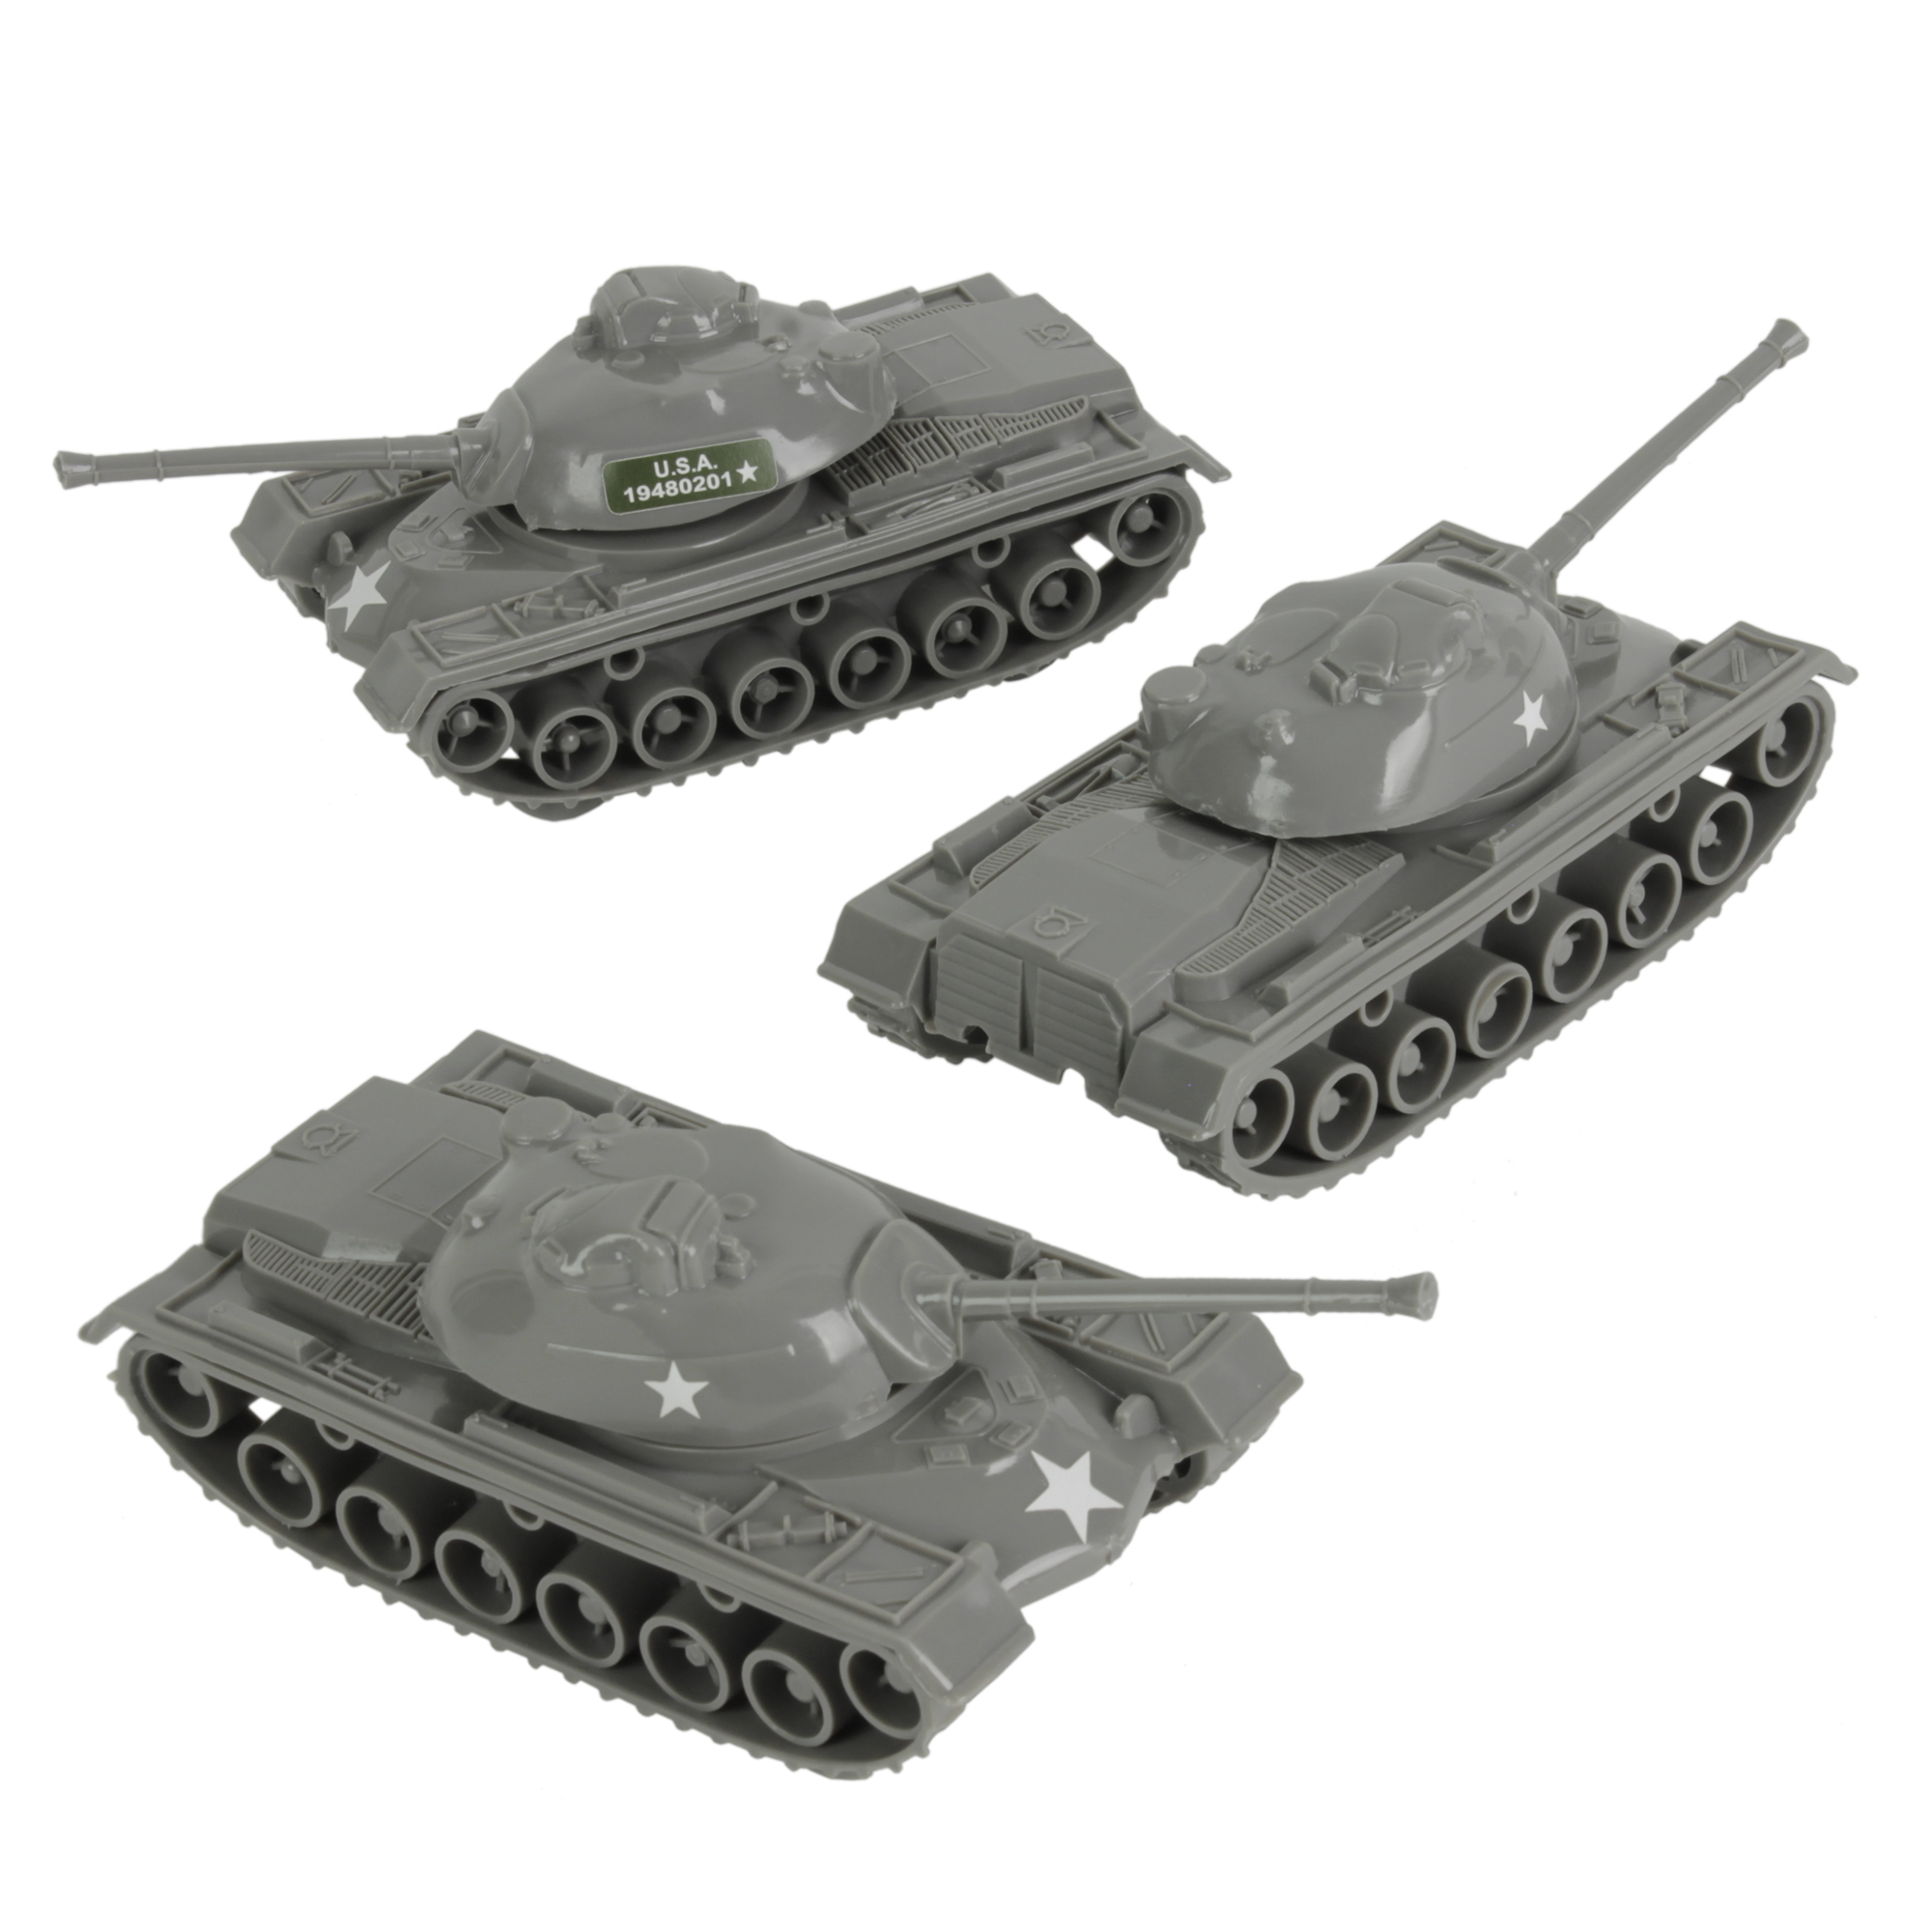 TimMee Toy Tanks for Plastic Army Men - Gray WW2 3pc - Made in USA - image 1 of 4